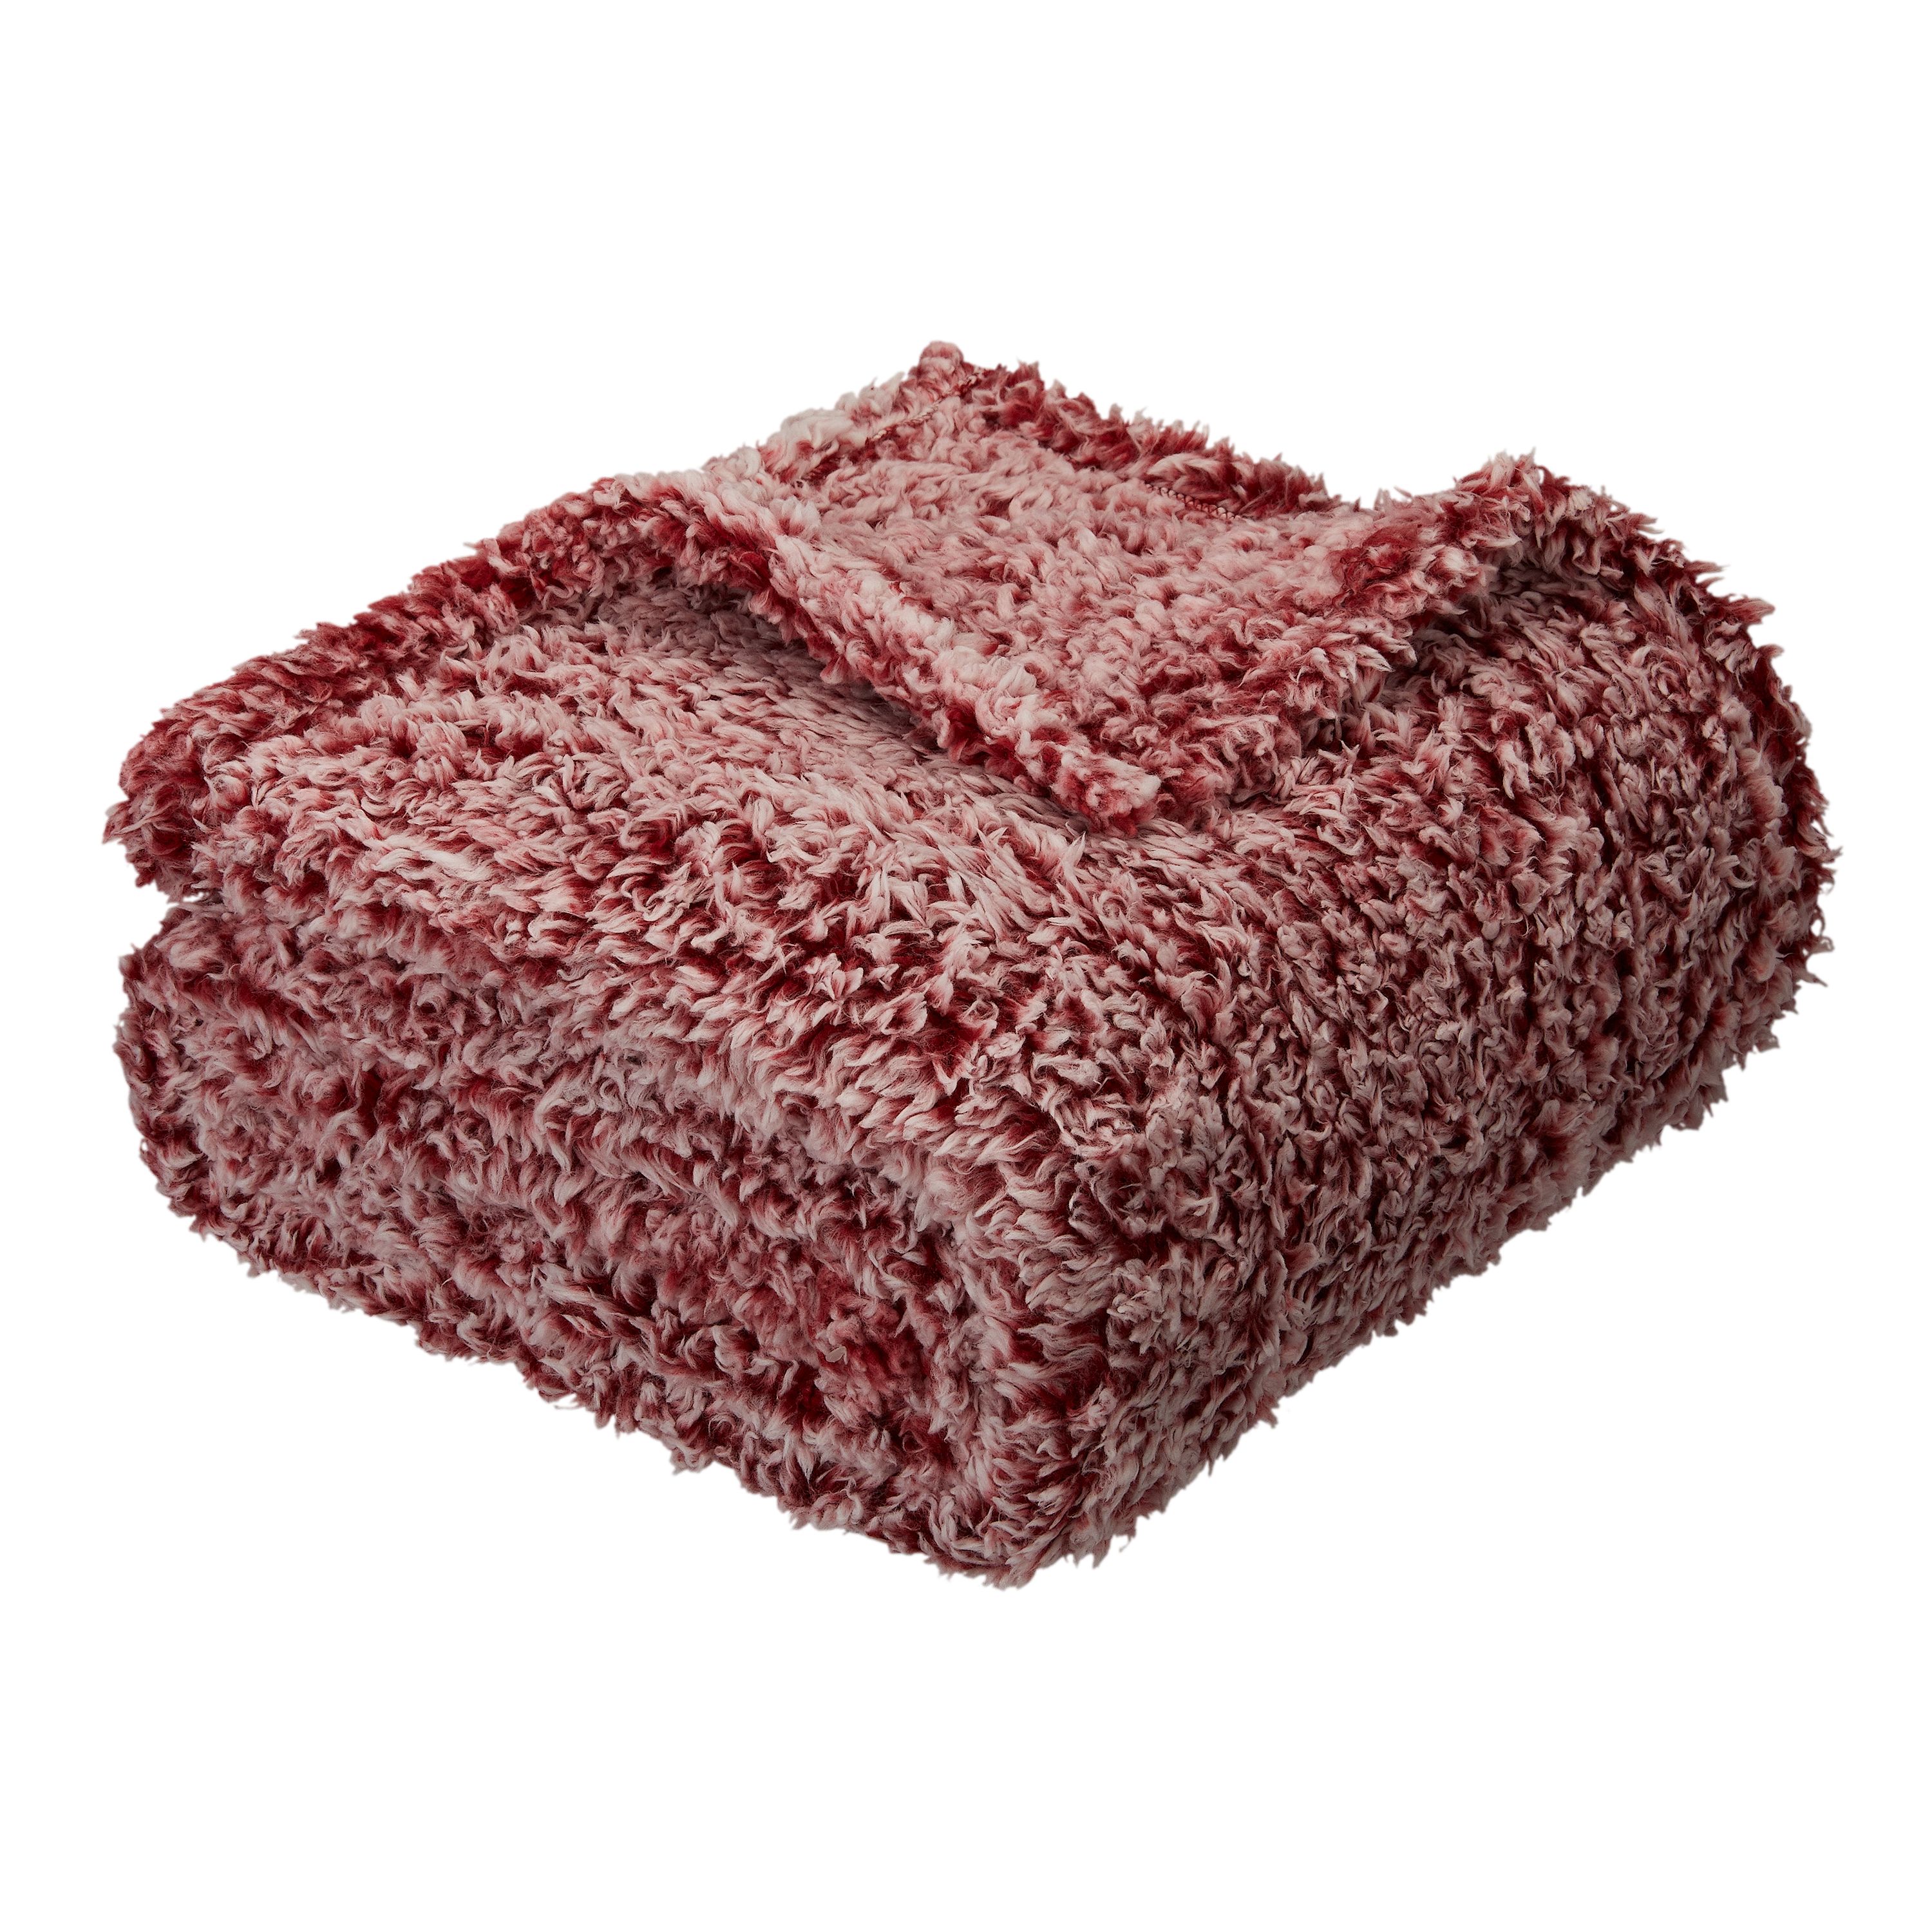 Mainstays Sherpa Throw Blanket, 50" X 60", Red - image 1 of 6